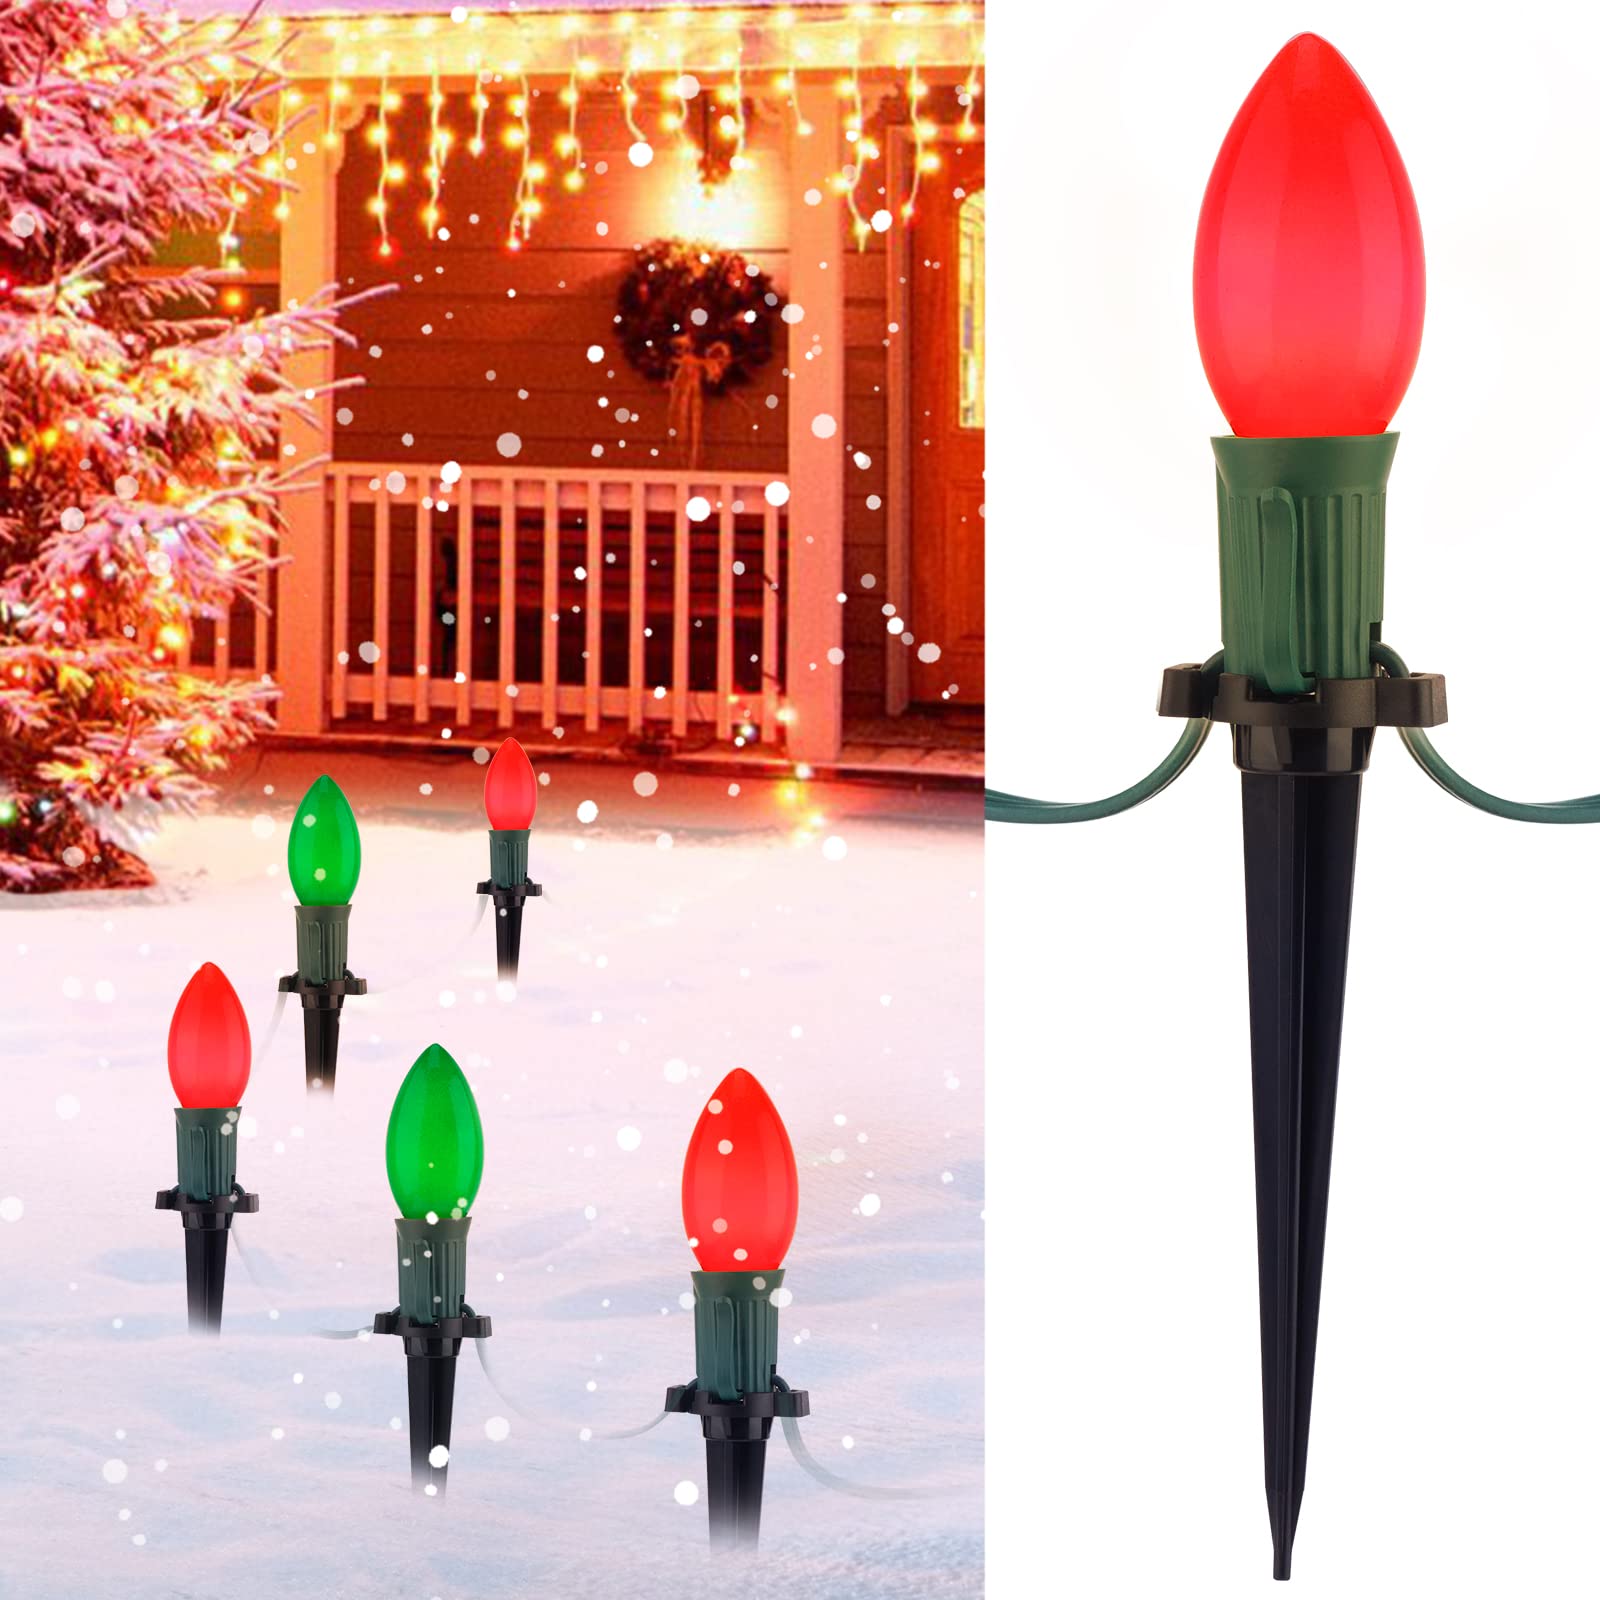 1 x 25.7 Feet / 20 ClearBulbs / Ceramic Red and Green